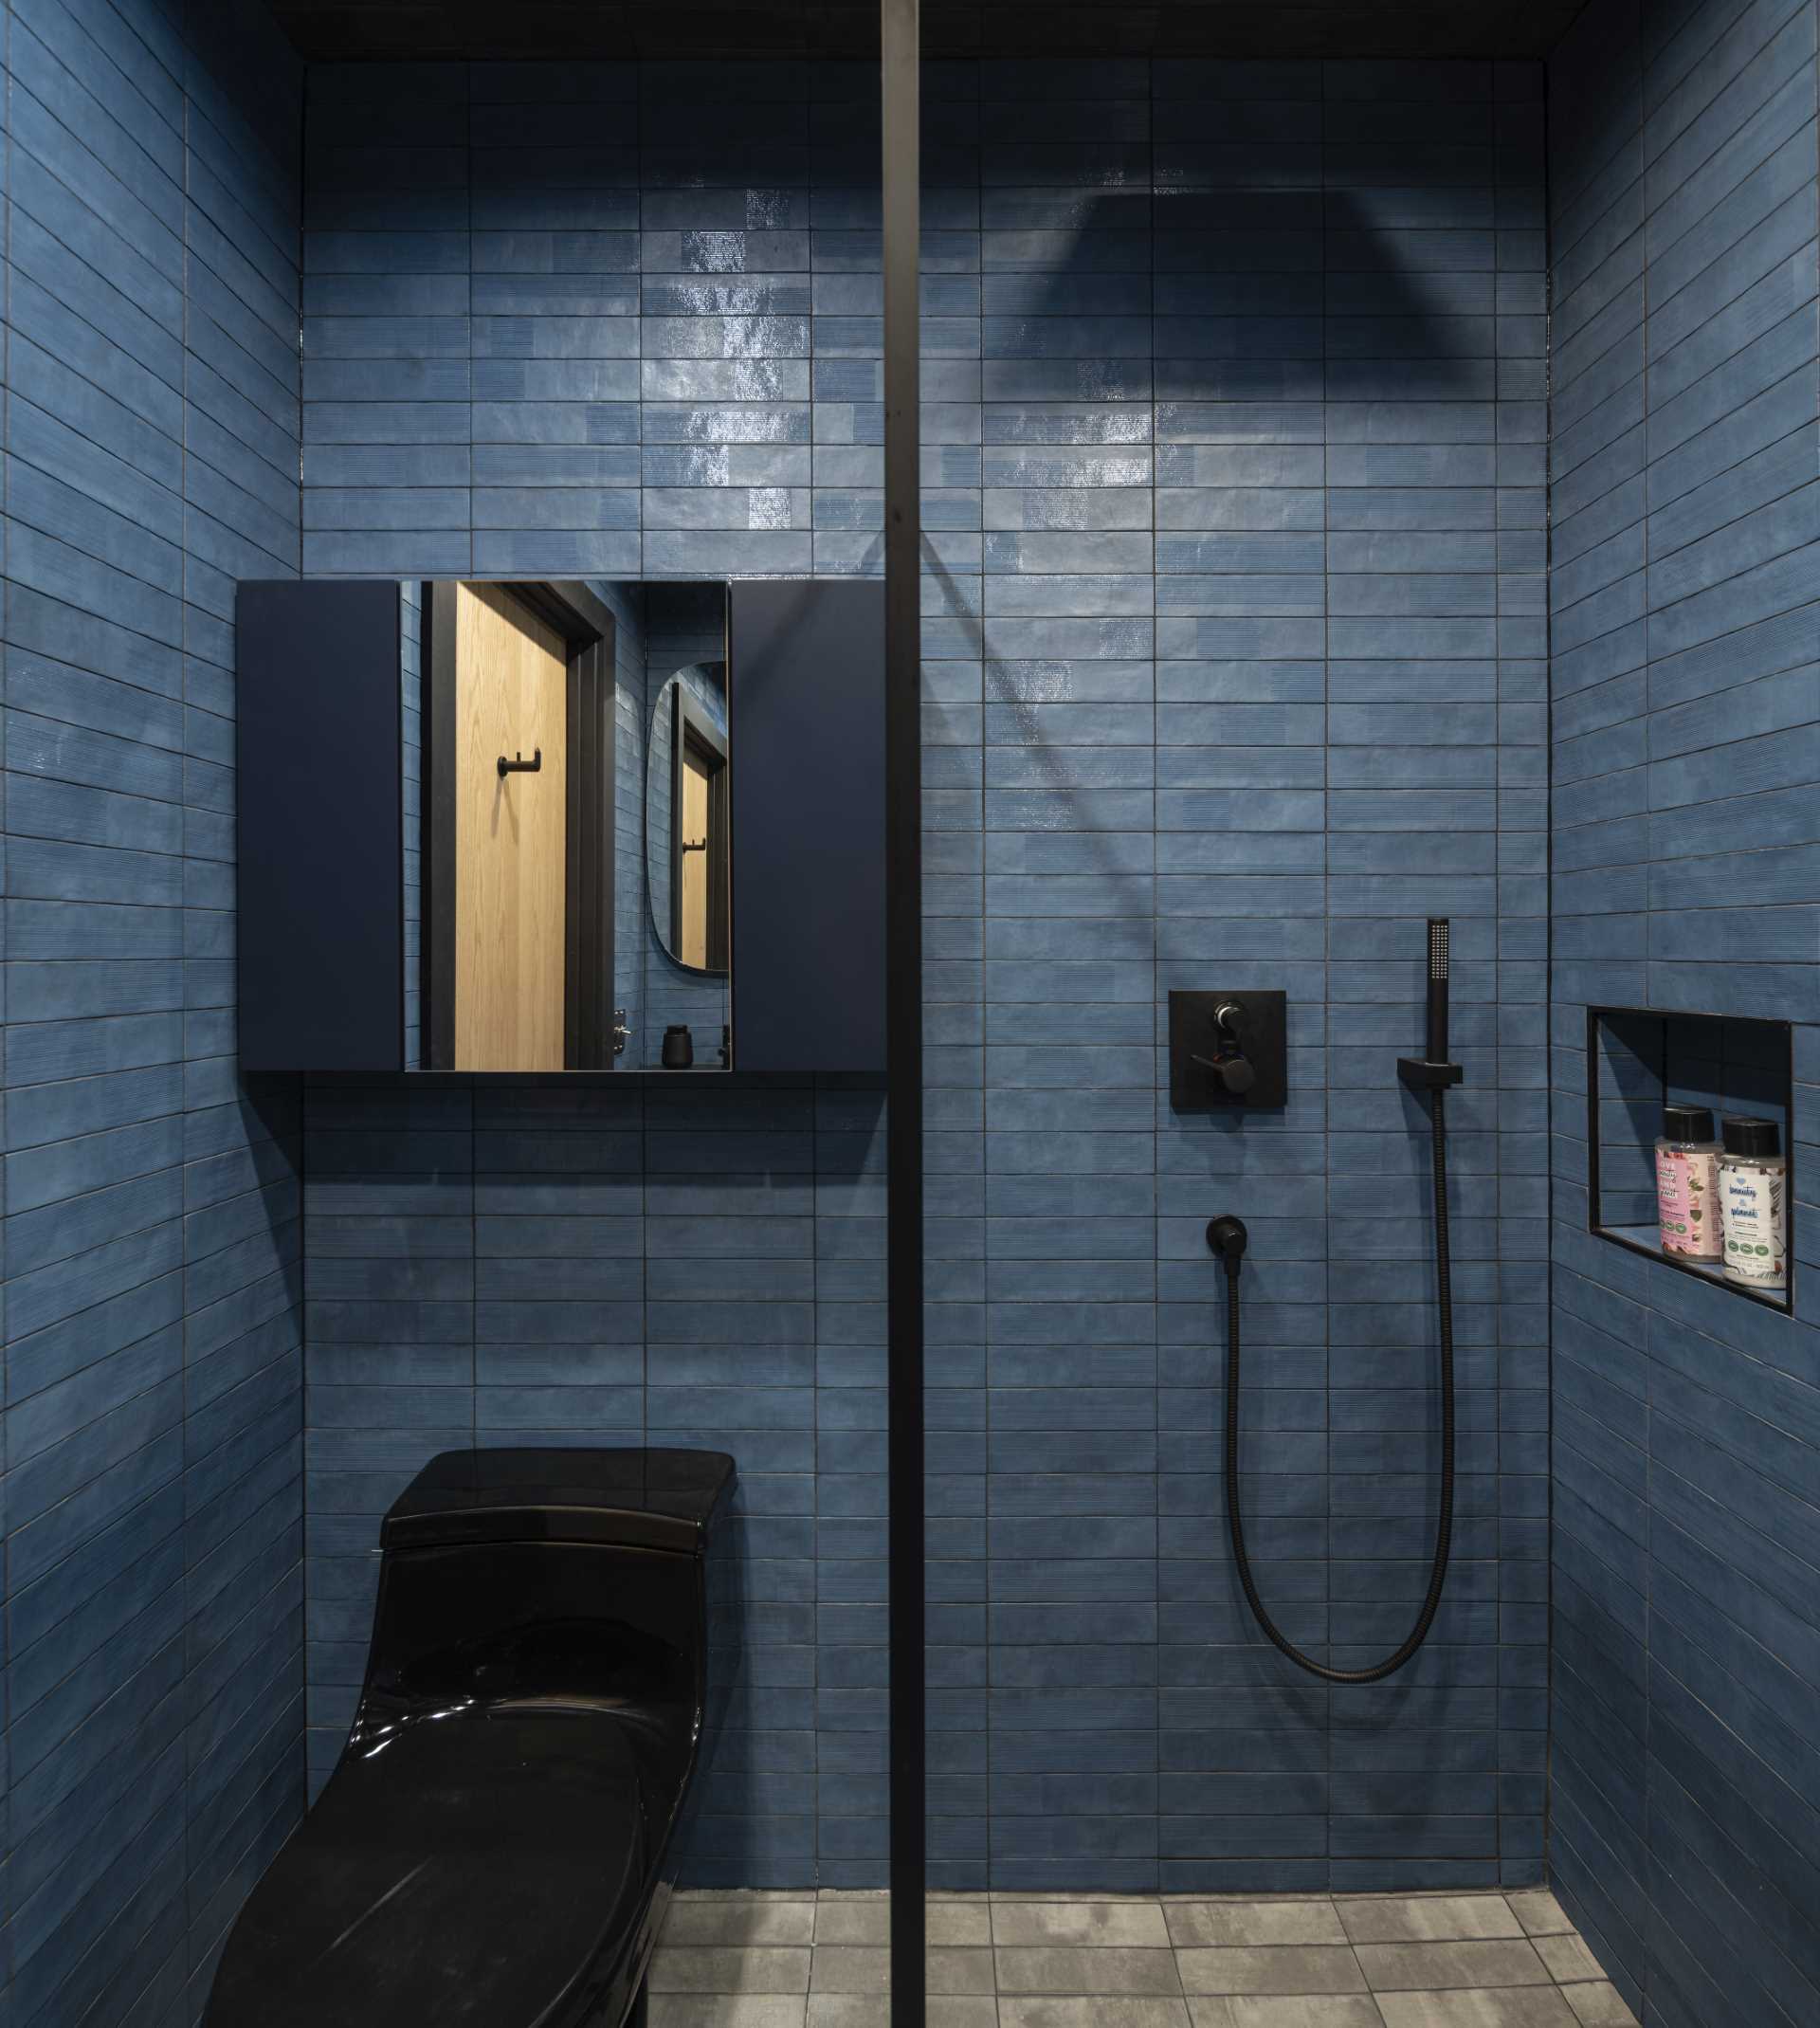 In this modern bathroom, blue tiles line the walls, grey tiles line the floor, and accents of black provide a contrasting element.